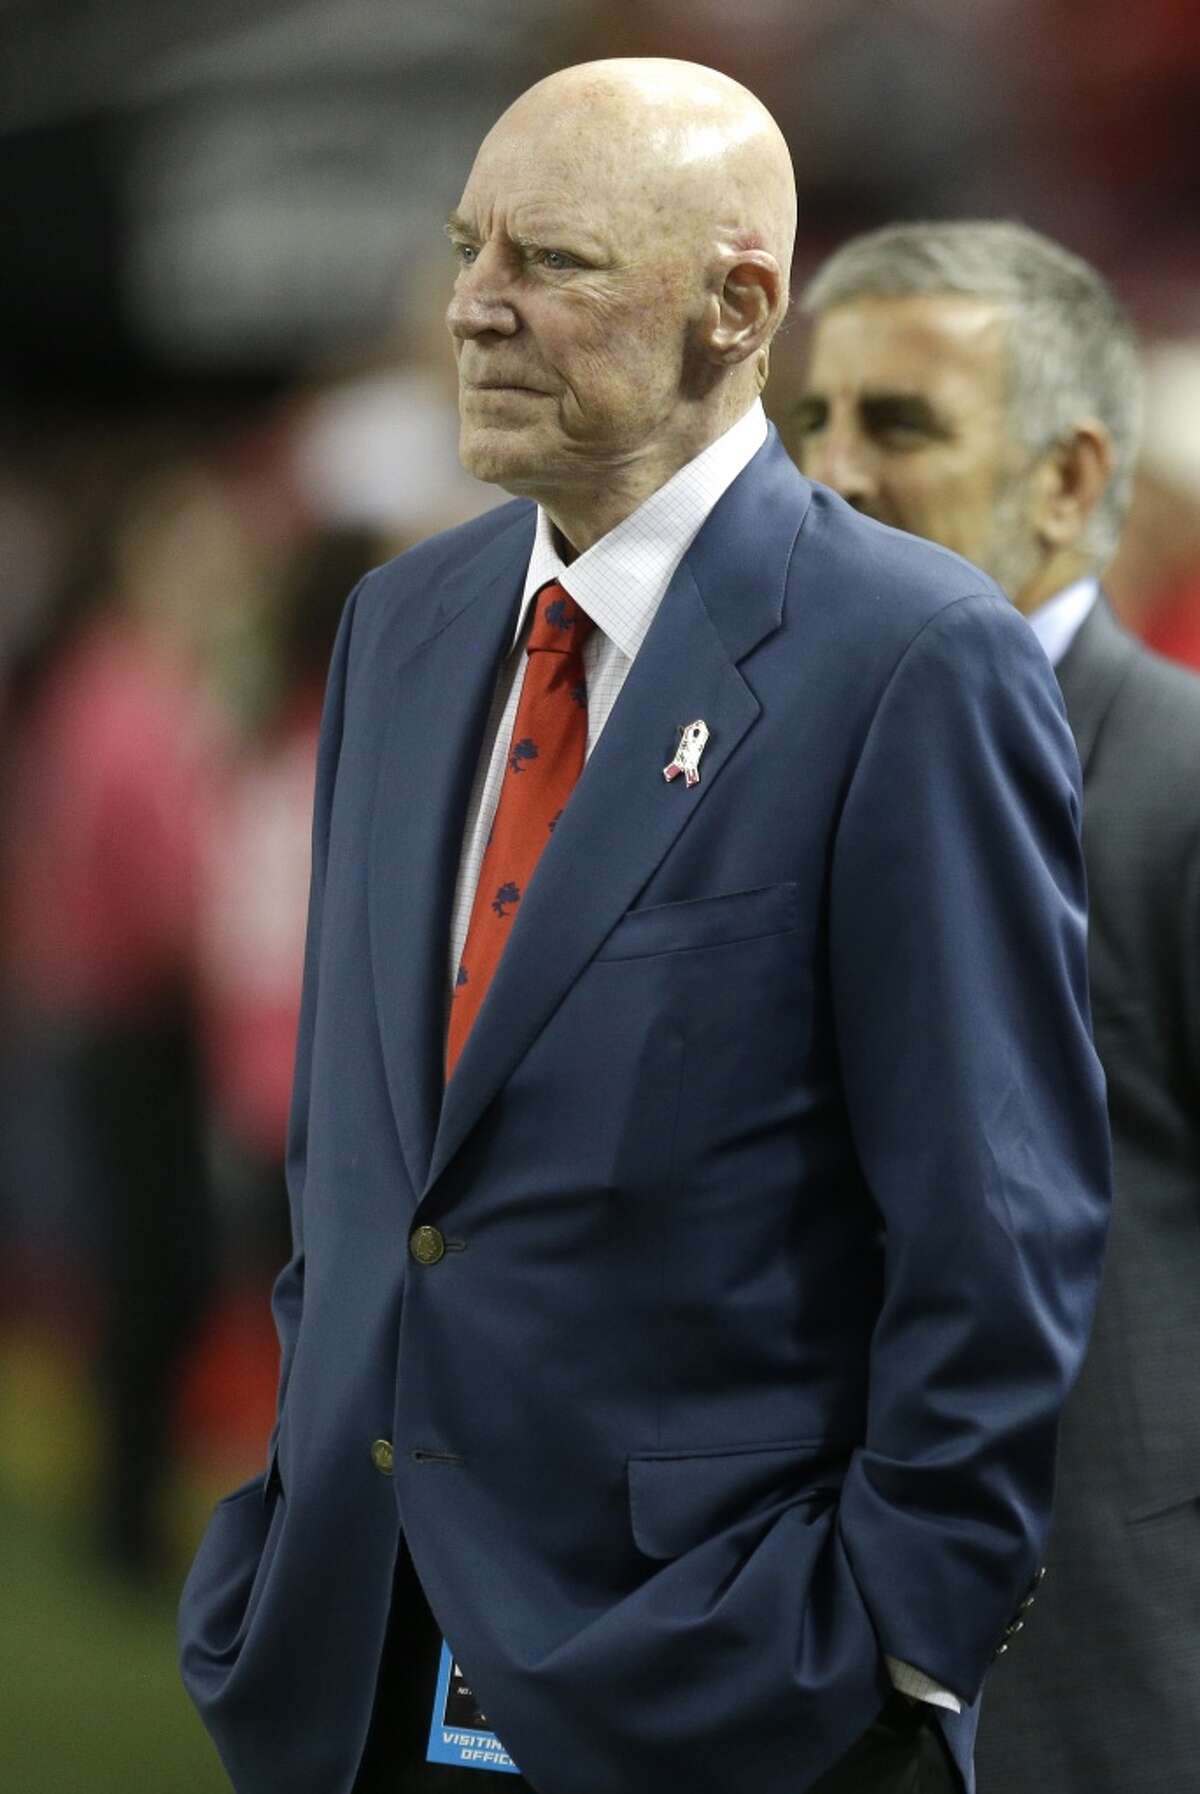 Houston Texans owner Bob McNair is donating money to an effort to defeat the Houston Equal Rights Ordinance.